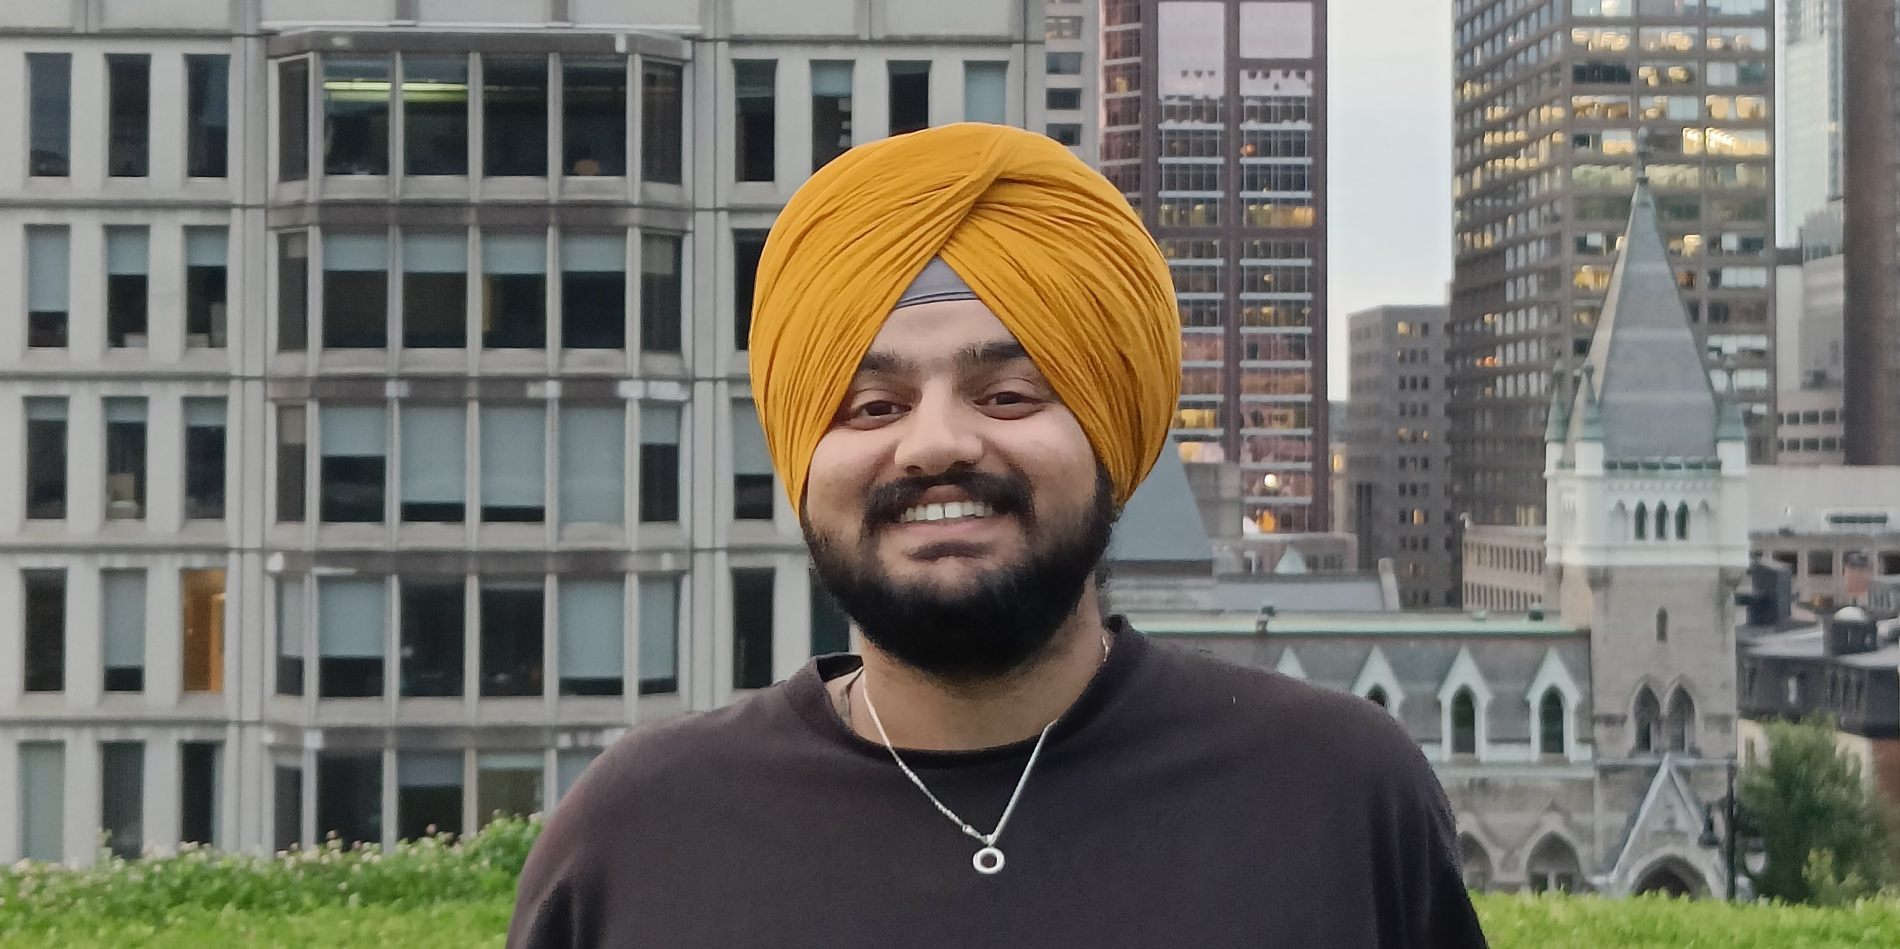 Prabhjot Singh Sanghera with the Montreal skyline in background